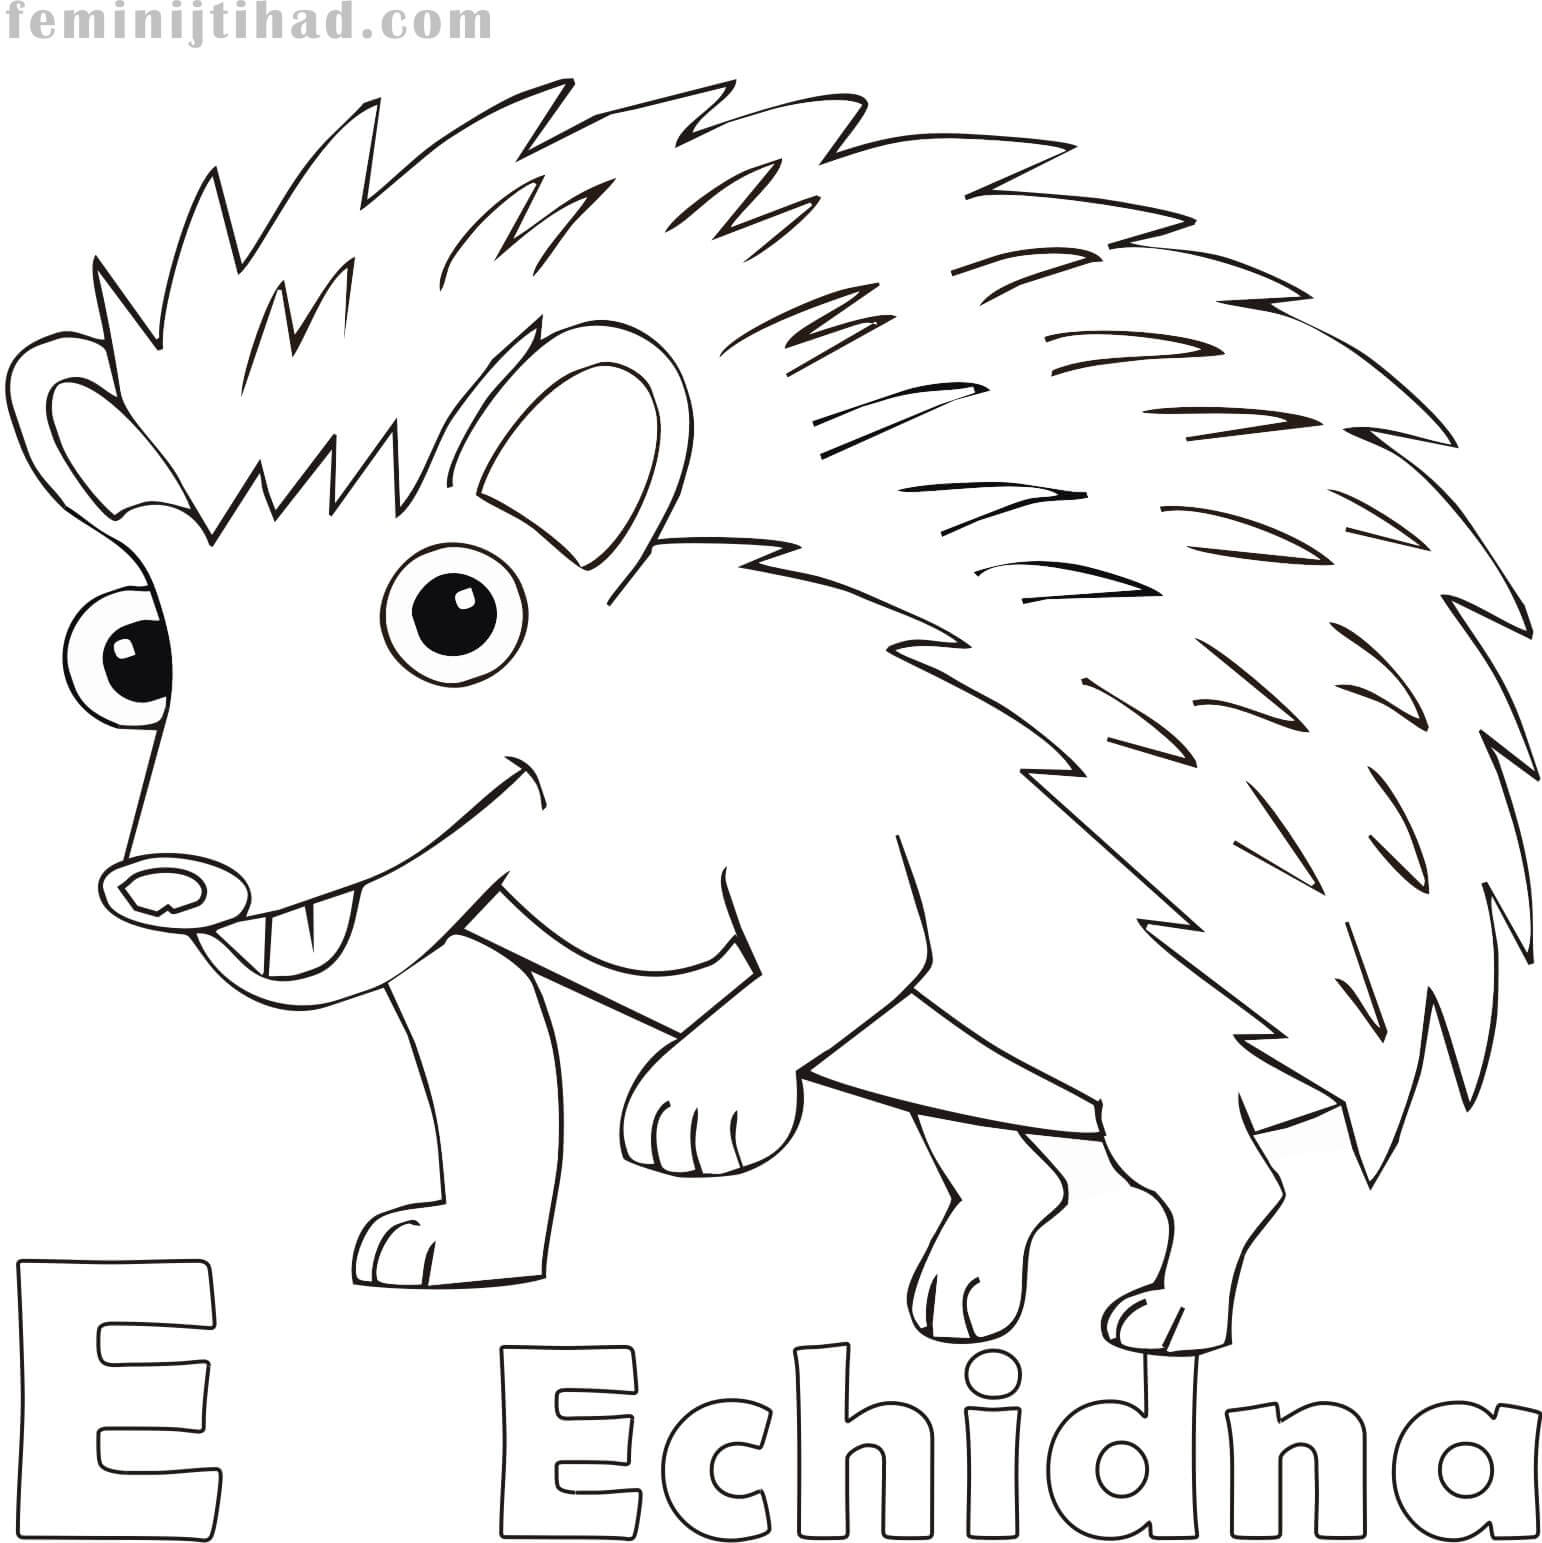 Free Echidna Coloring Page Printable